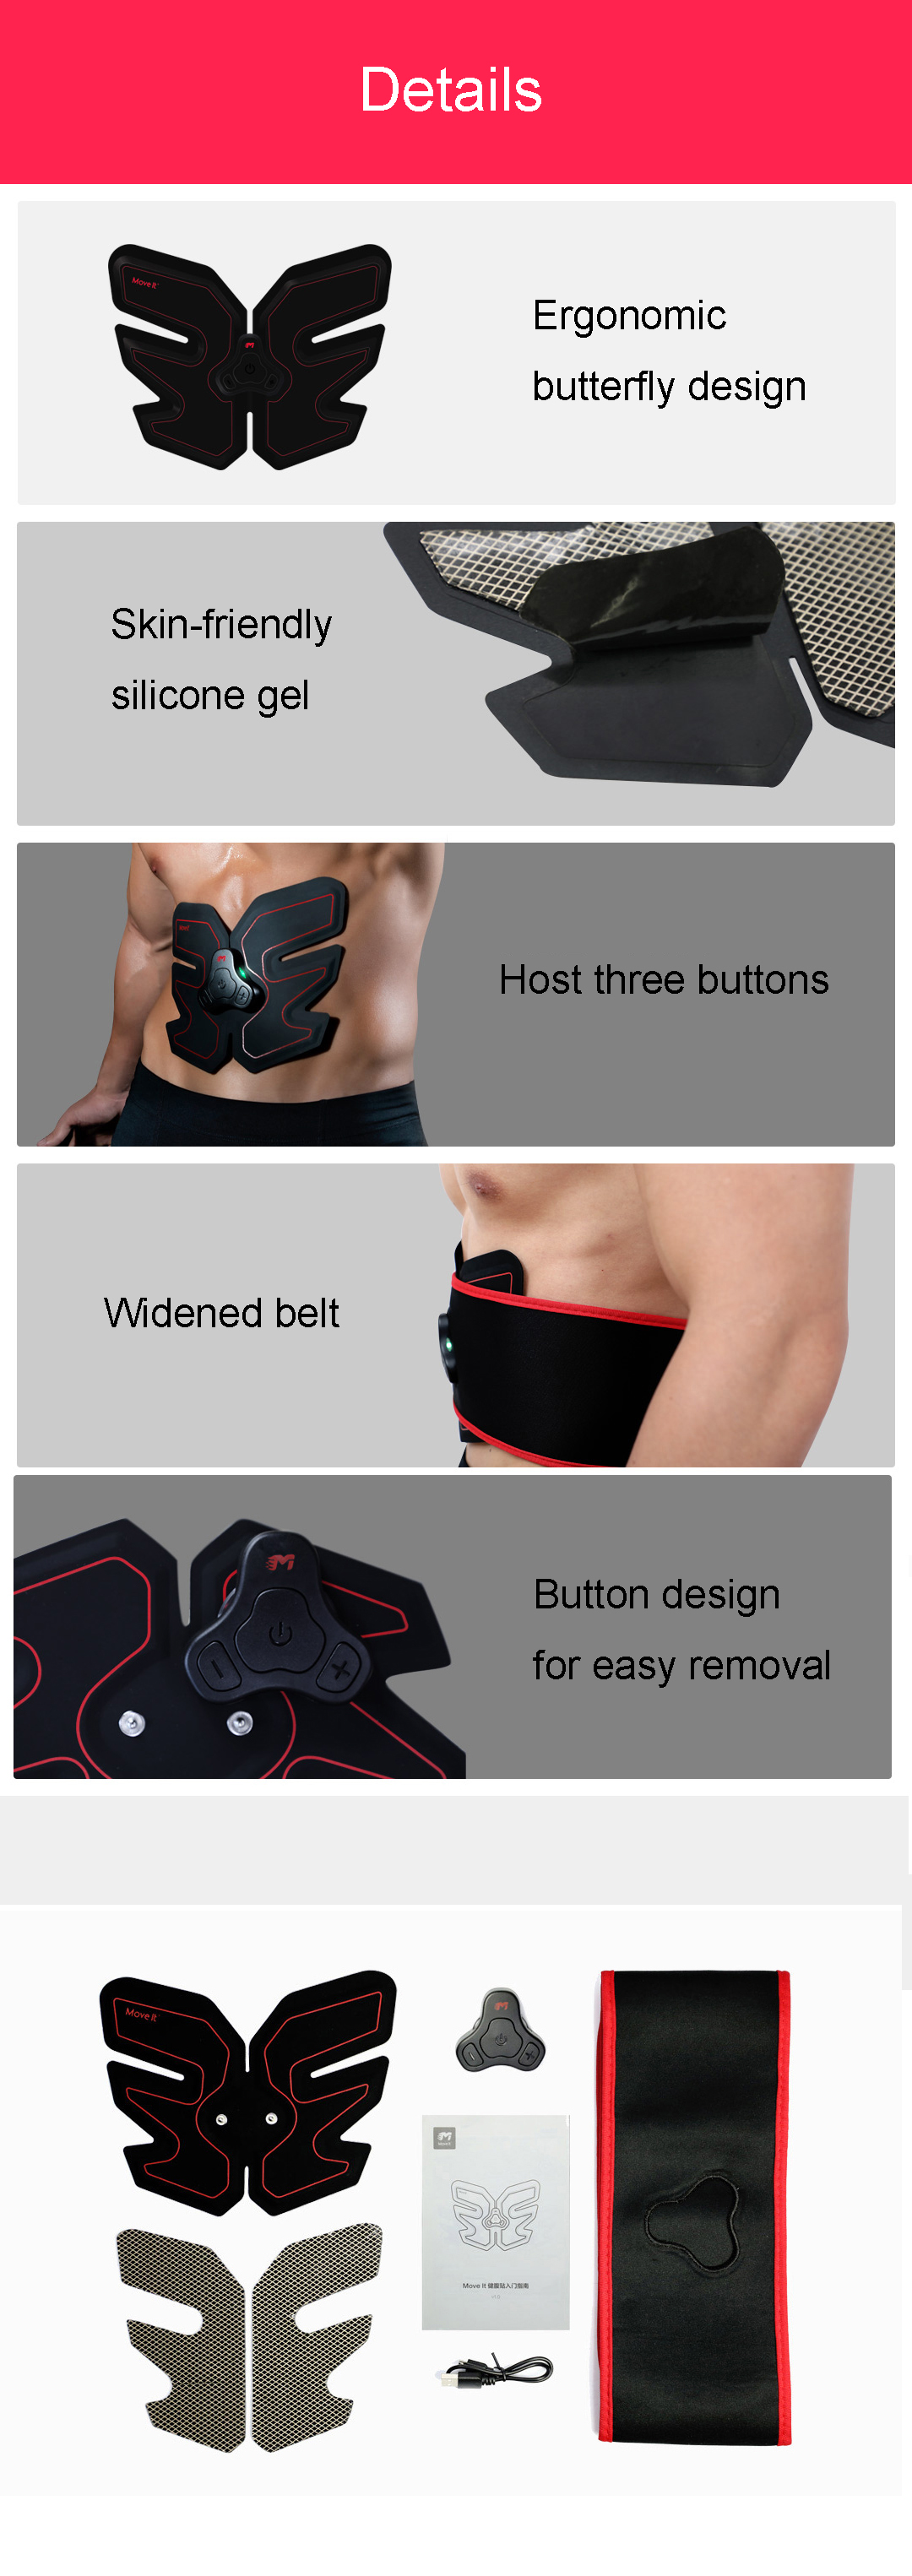 Move-It-Abdominal-Muscle-Trainer-Rechargeable-Wireless-EMS-Stimulator-Fitness-Body-Shaping-1510496-9